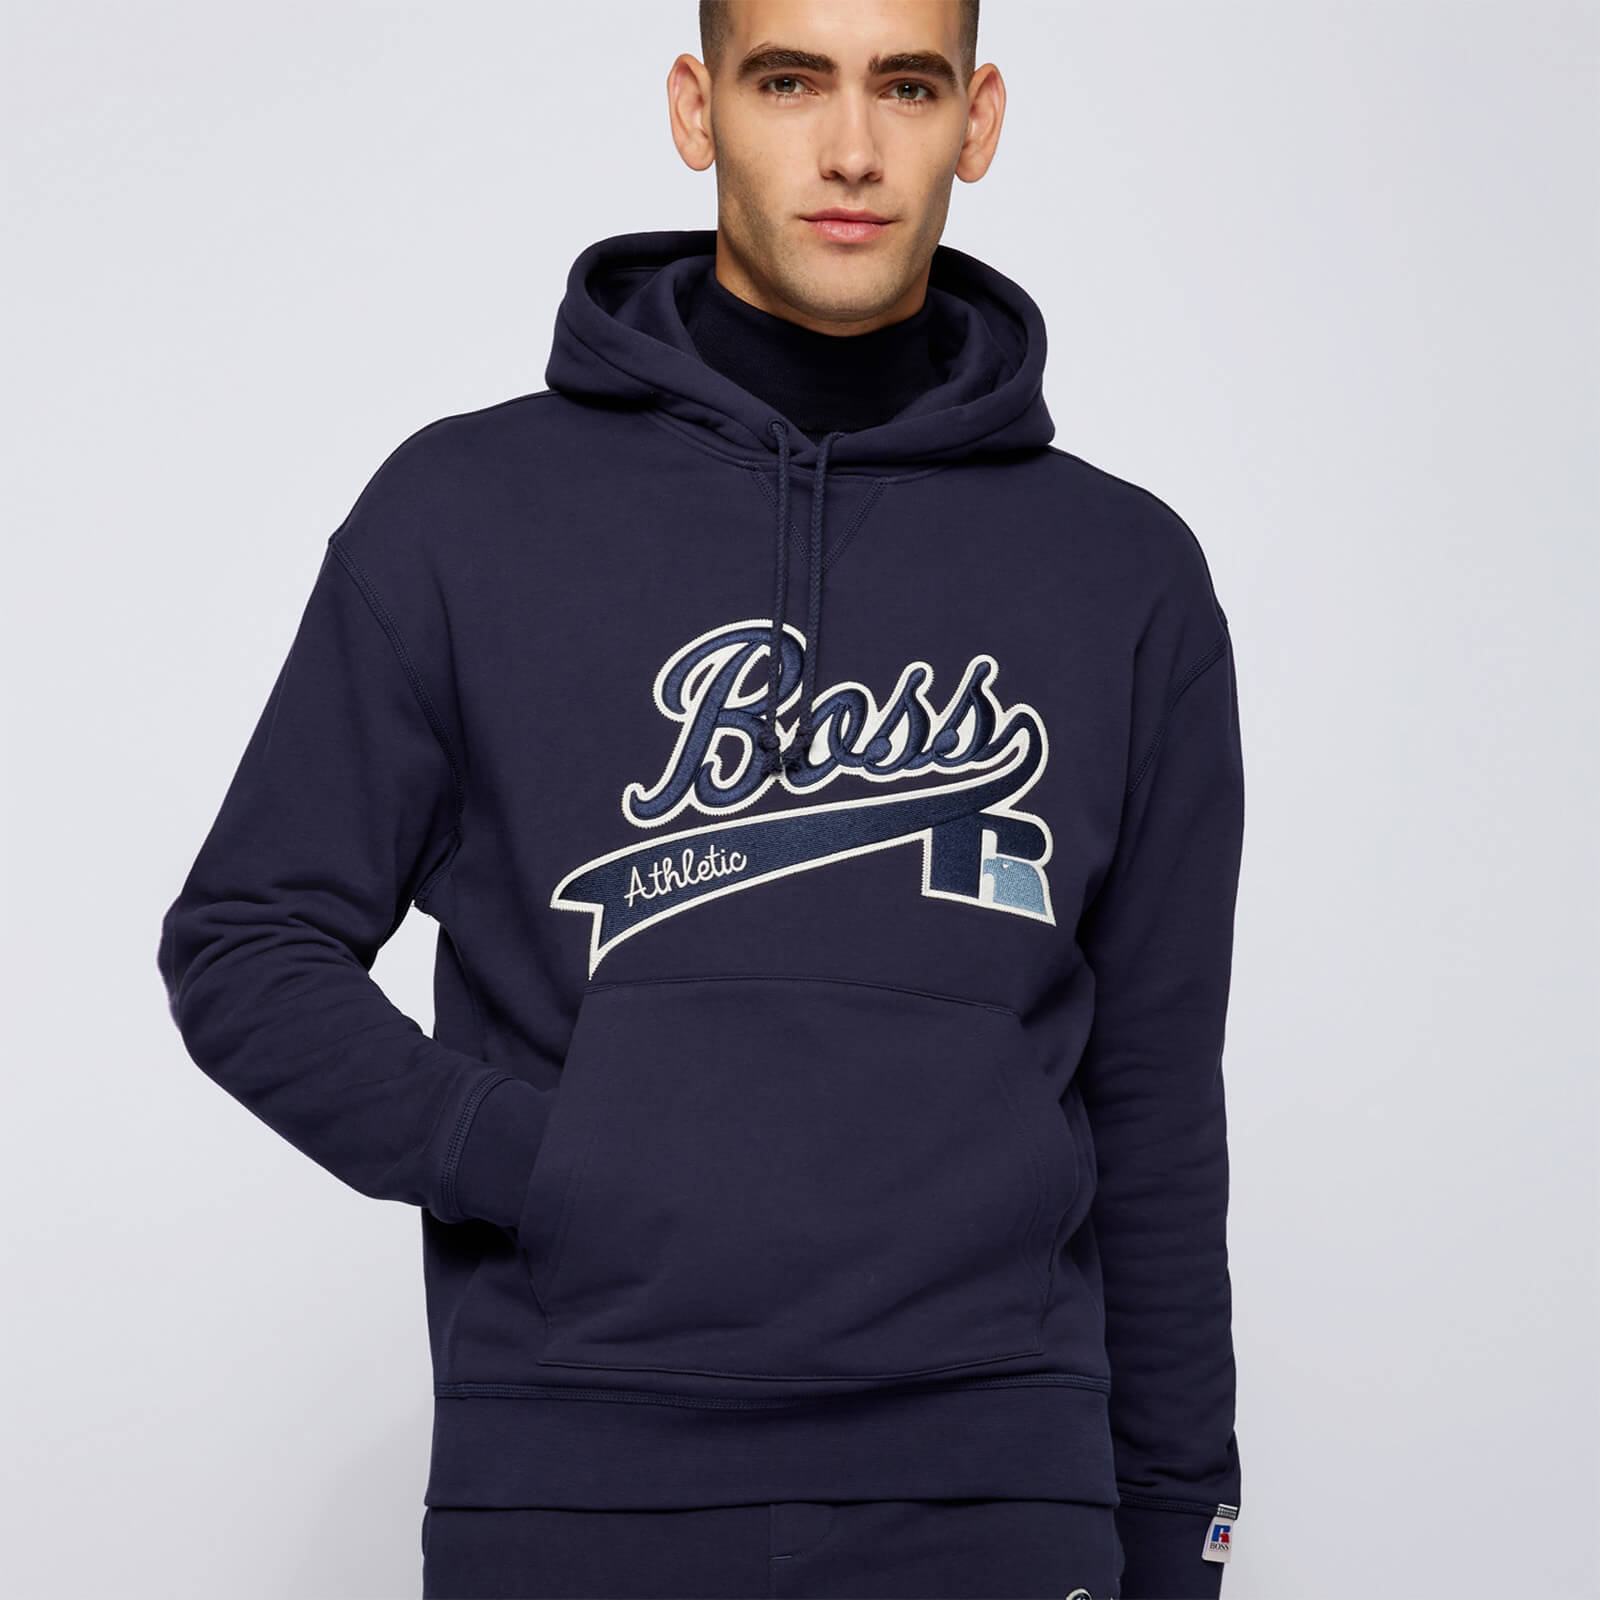 BOSS X Russell Athletic Men's Safa Pullover Hoodie - Navy - S